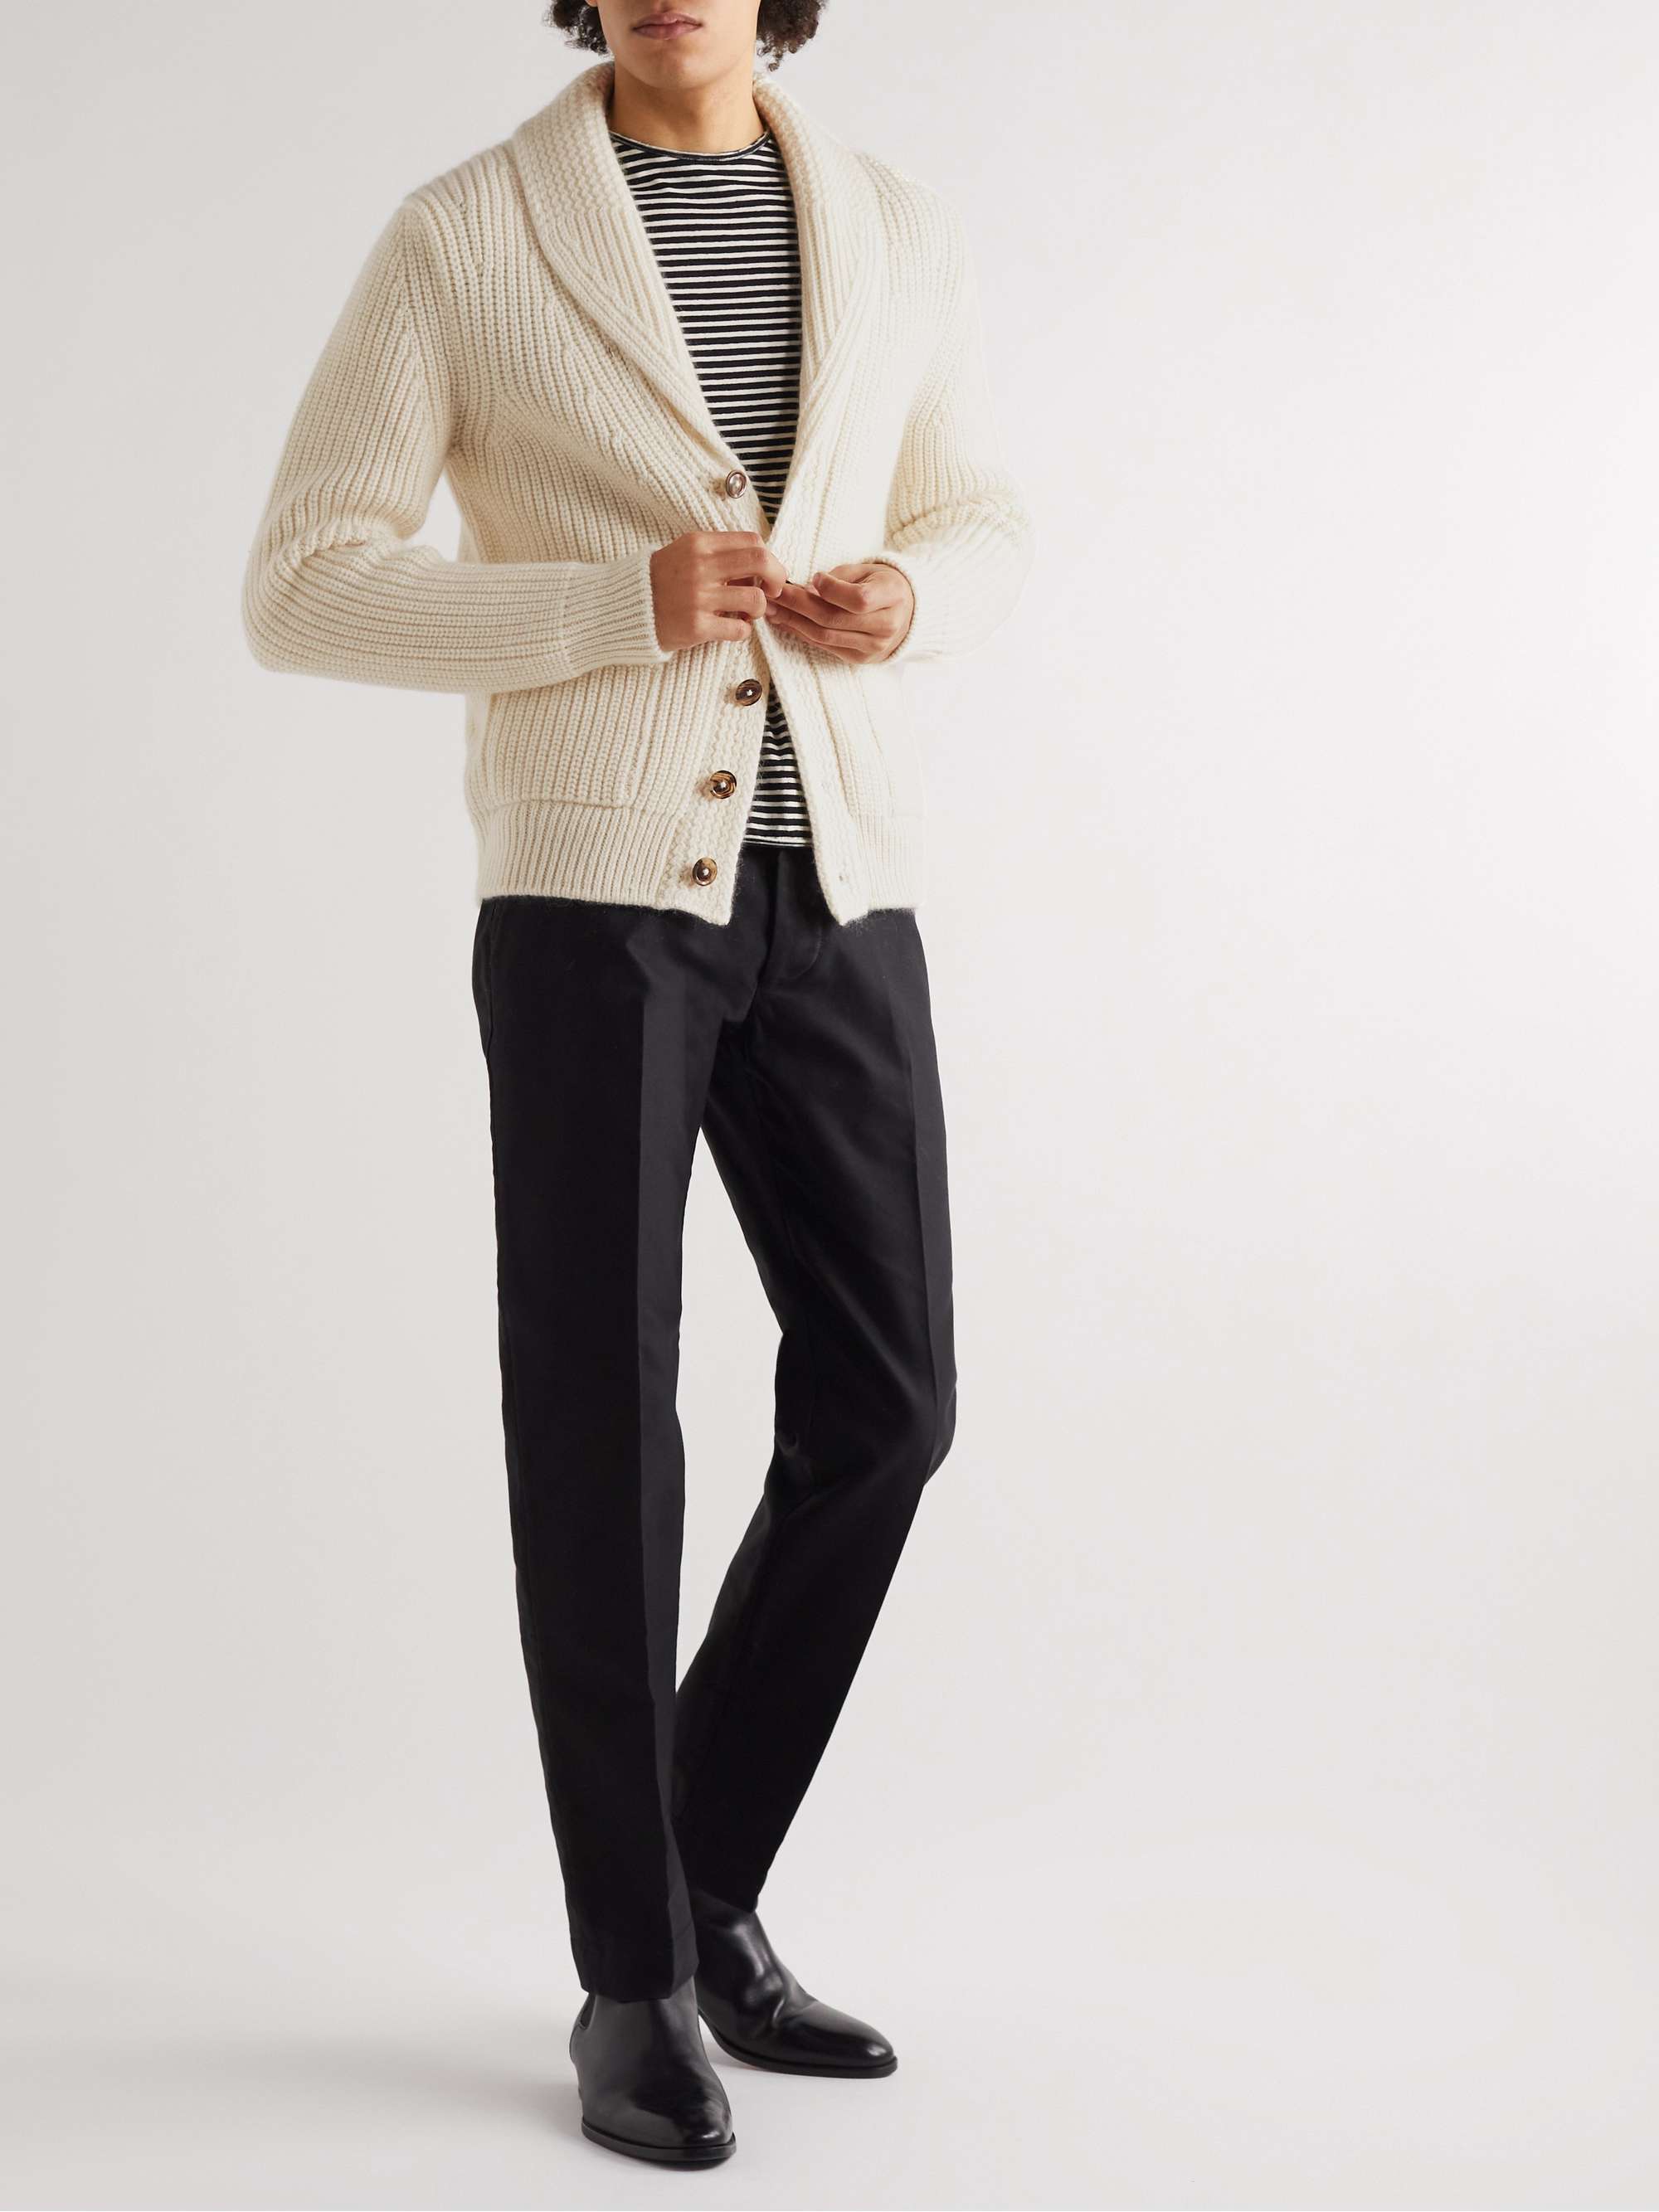 TOM FORD Shawl-Collar Cashmere and Mohair-Blend Cardigan